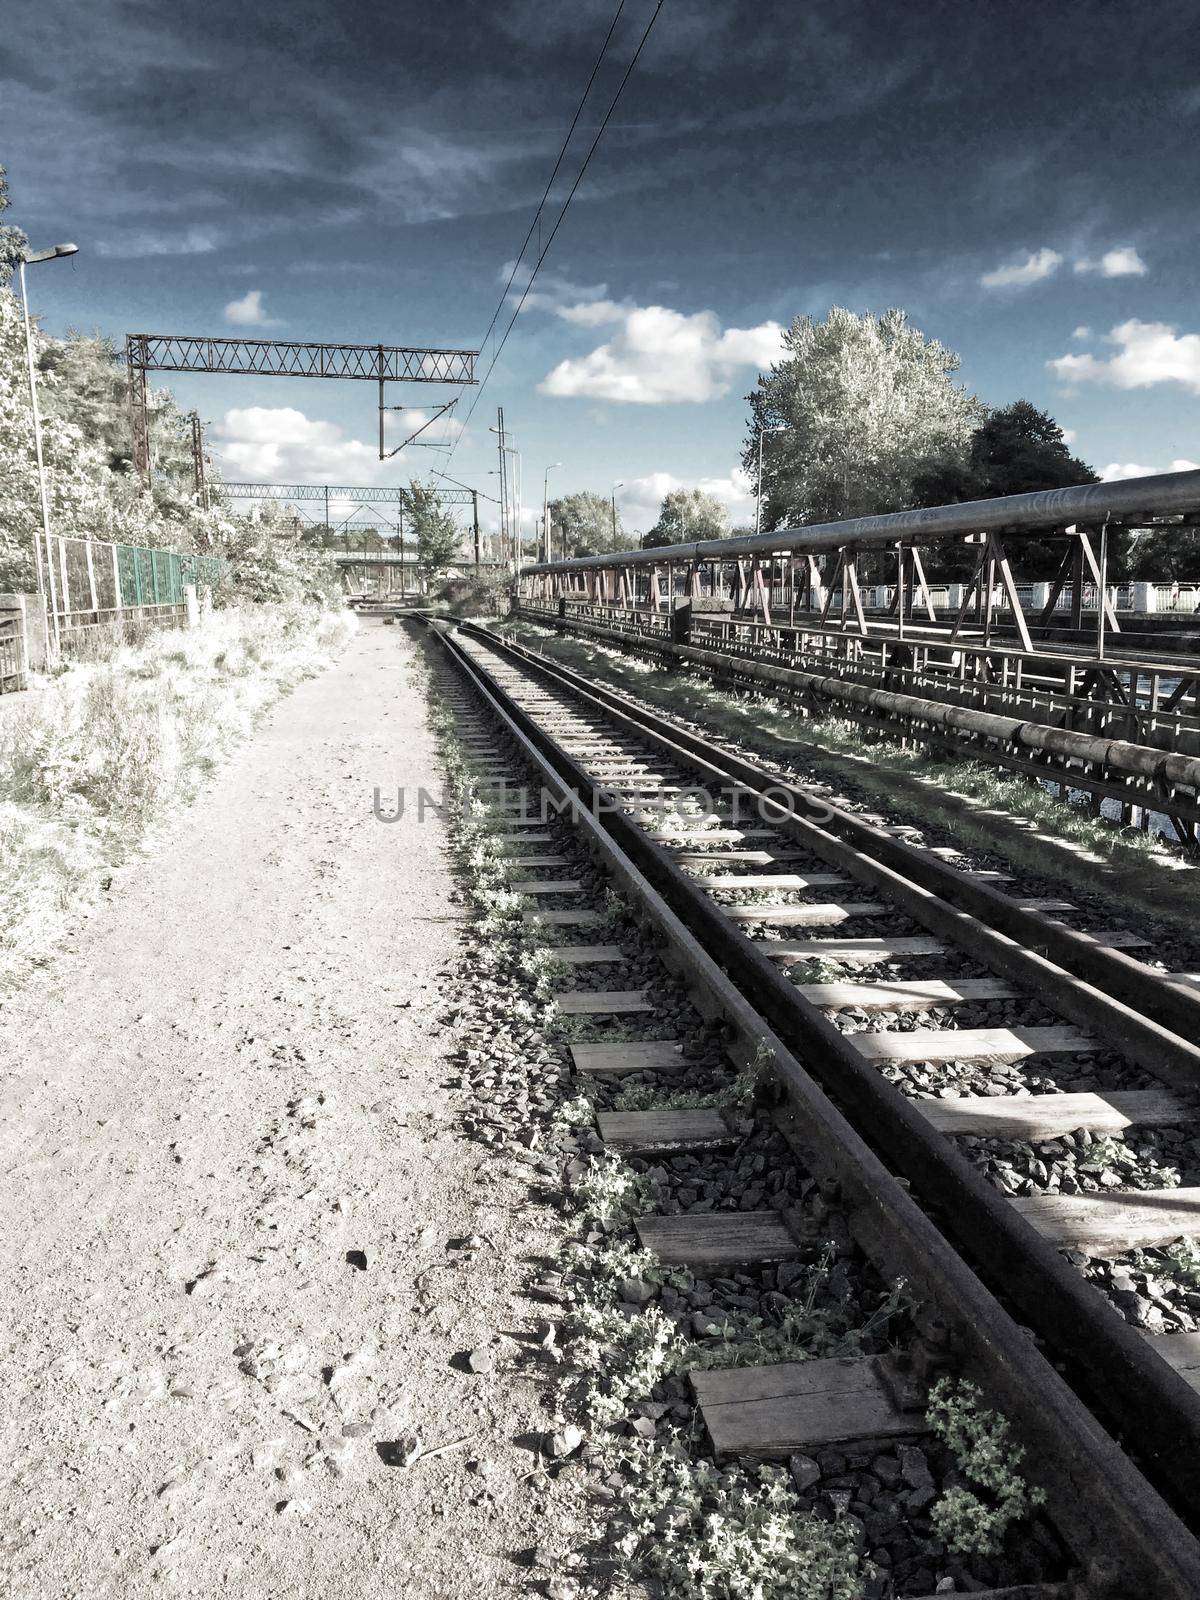 rails out of order in an infrared photo